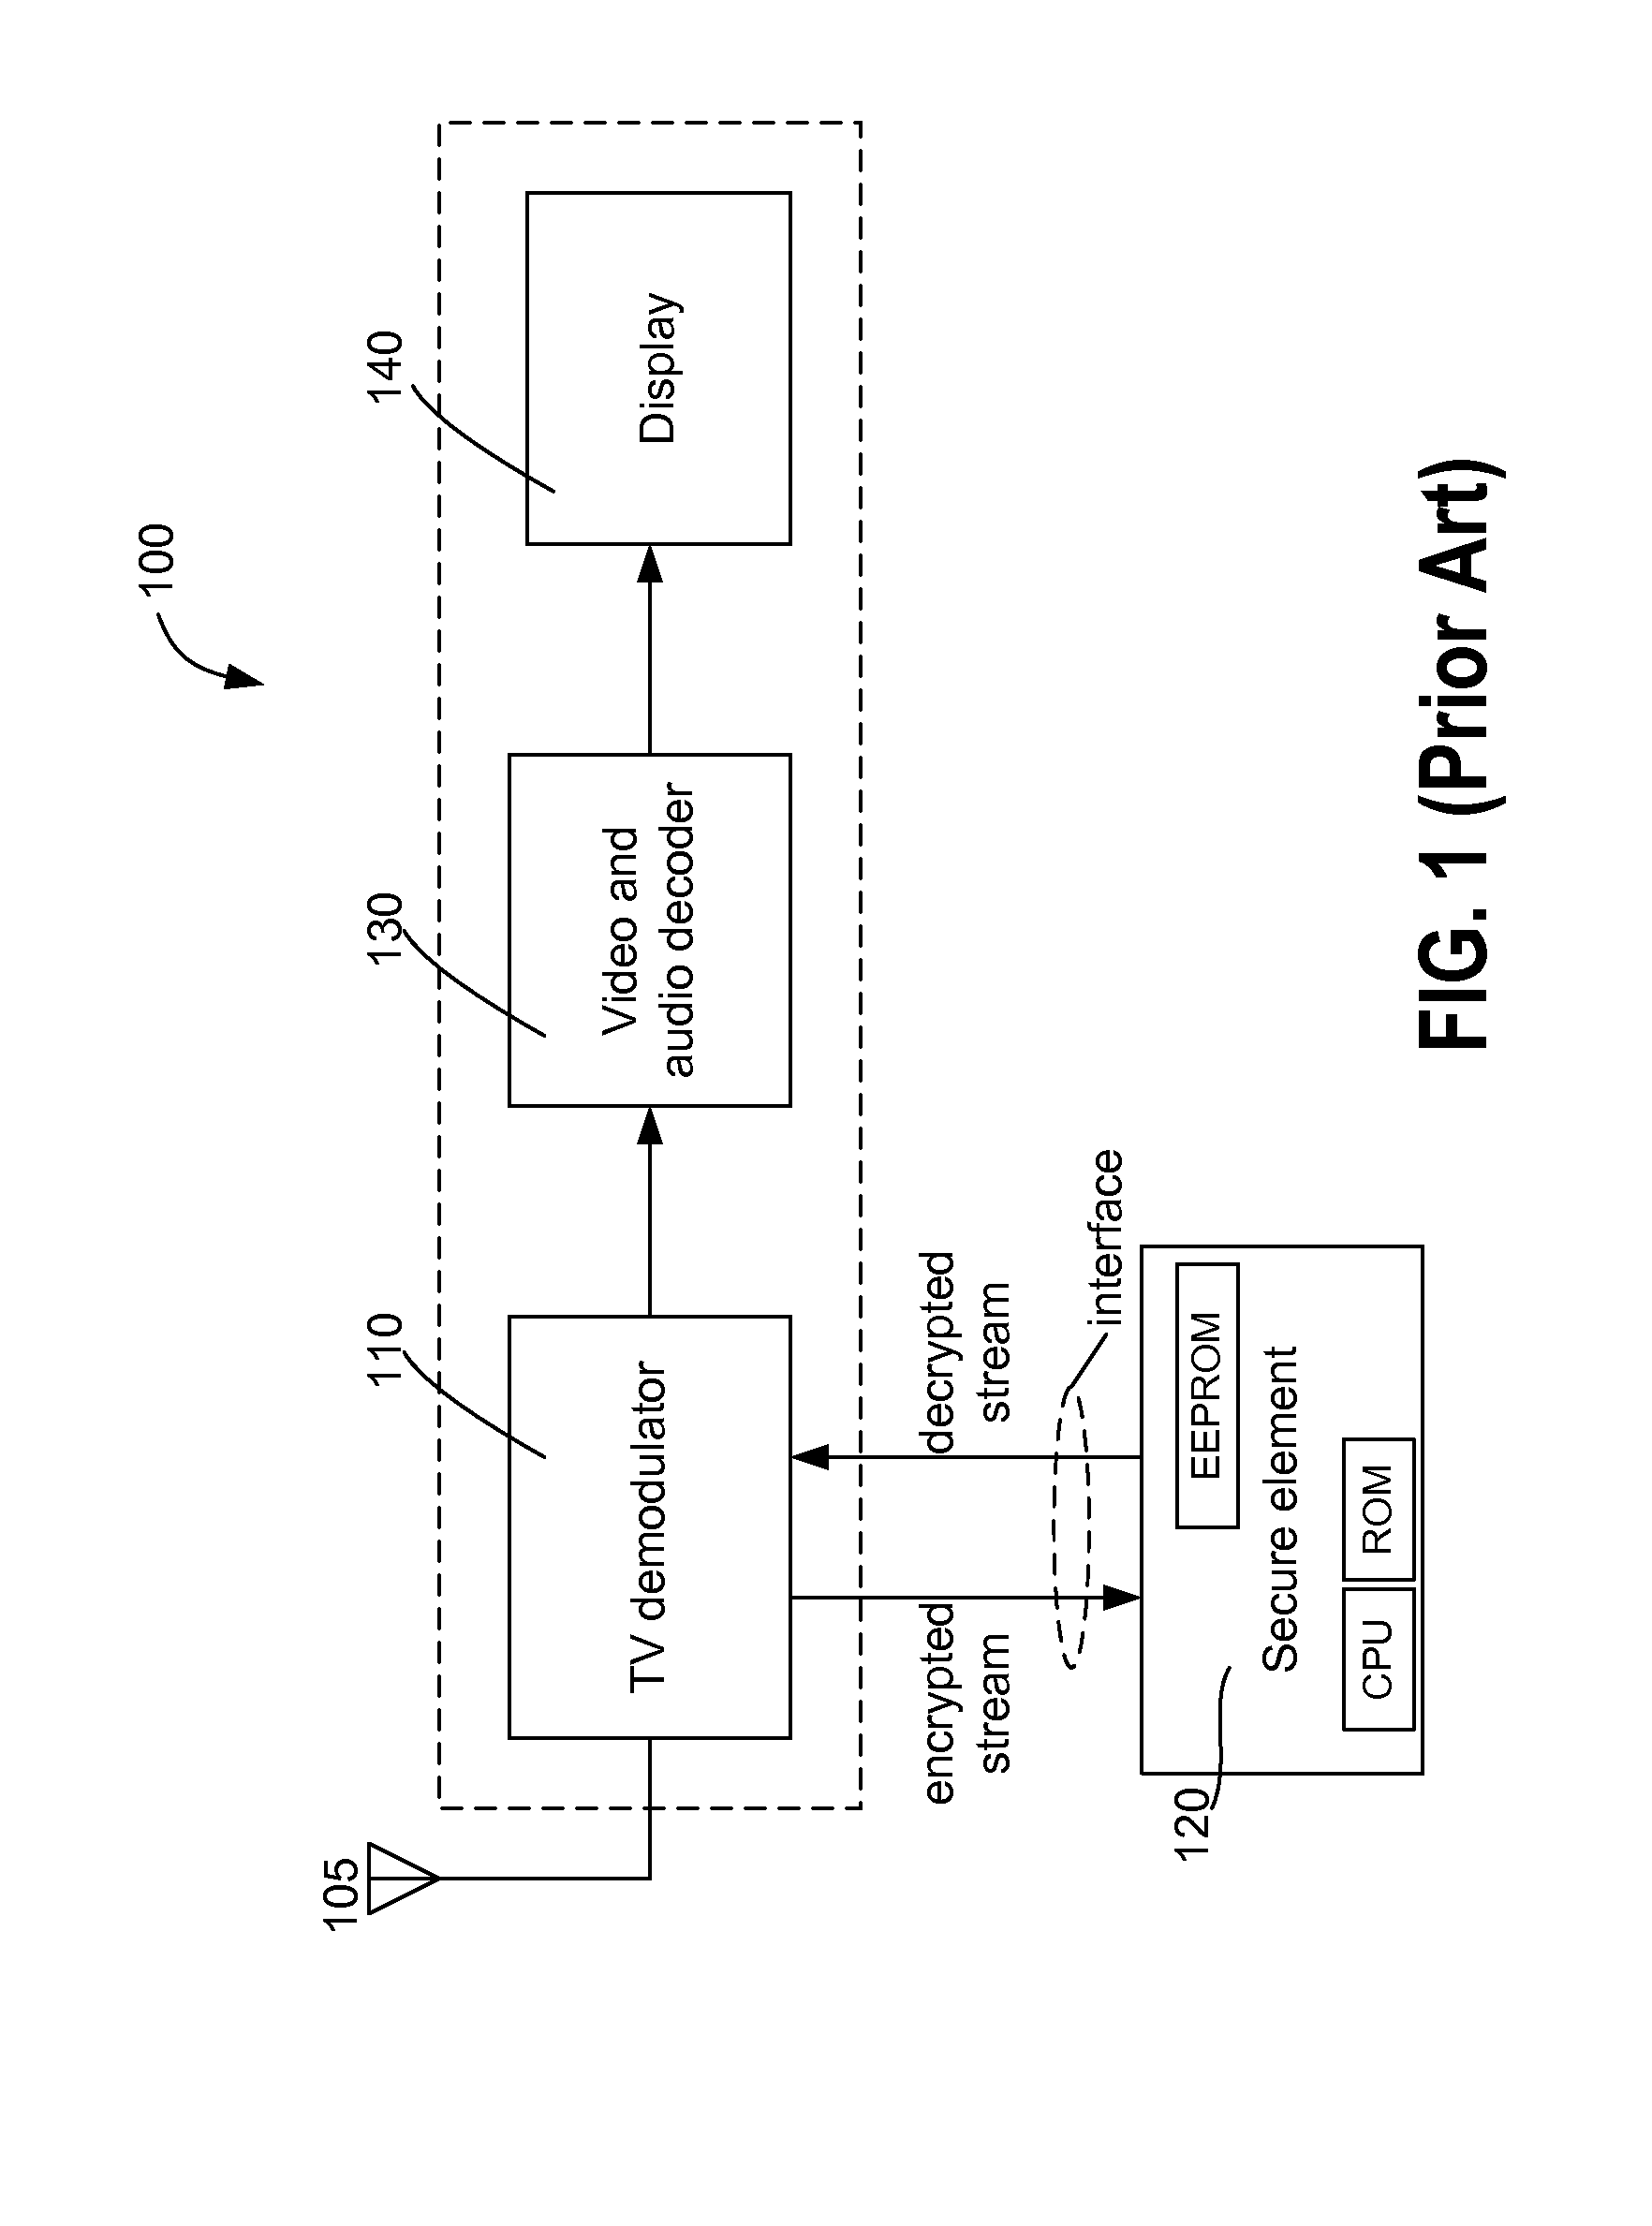 Firmware Authentication and Deciphering for Secure TV Receiver